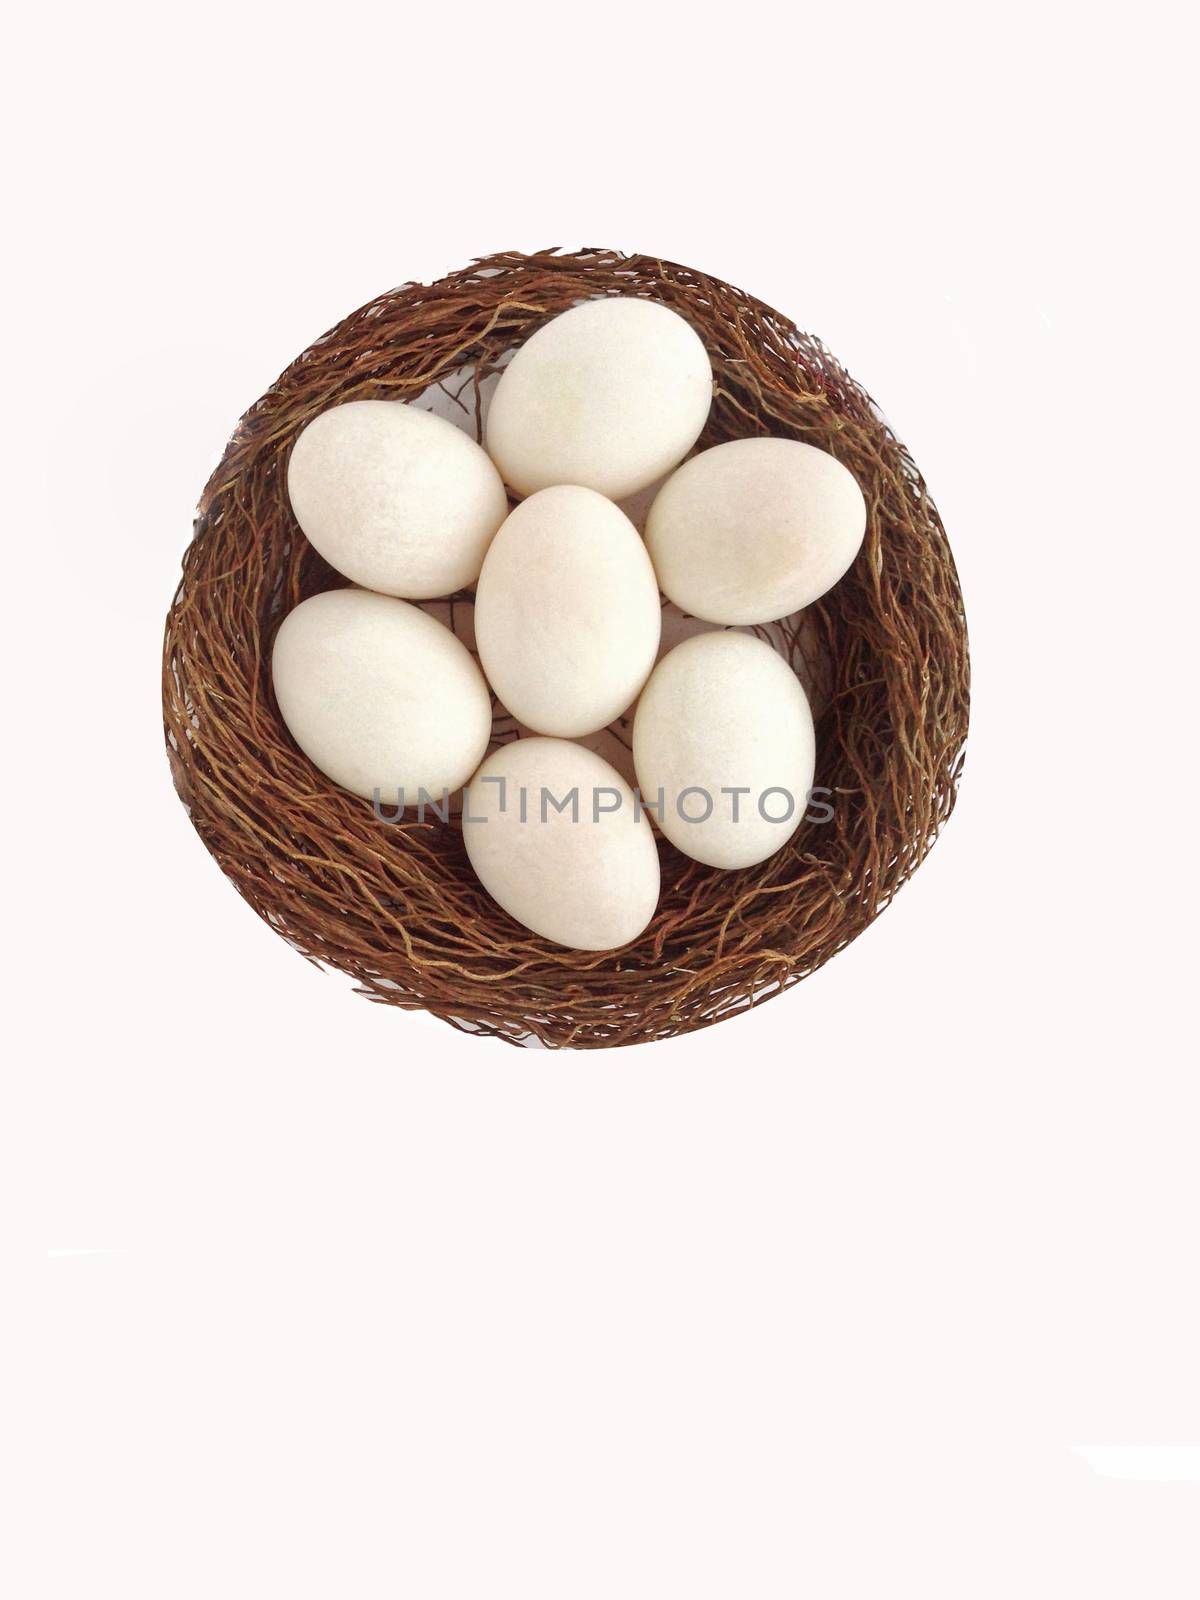 Duck egg on nest made from banyan tree air root with white backg by Bowonpat